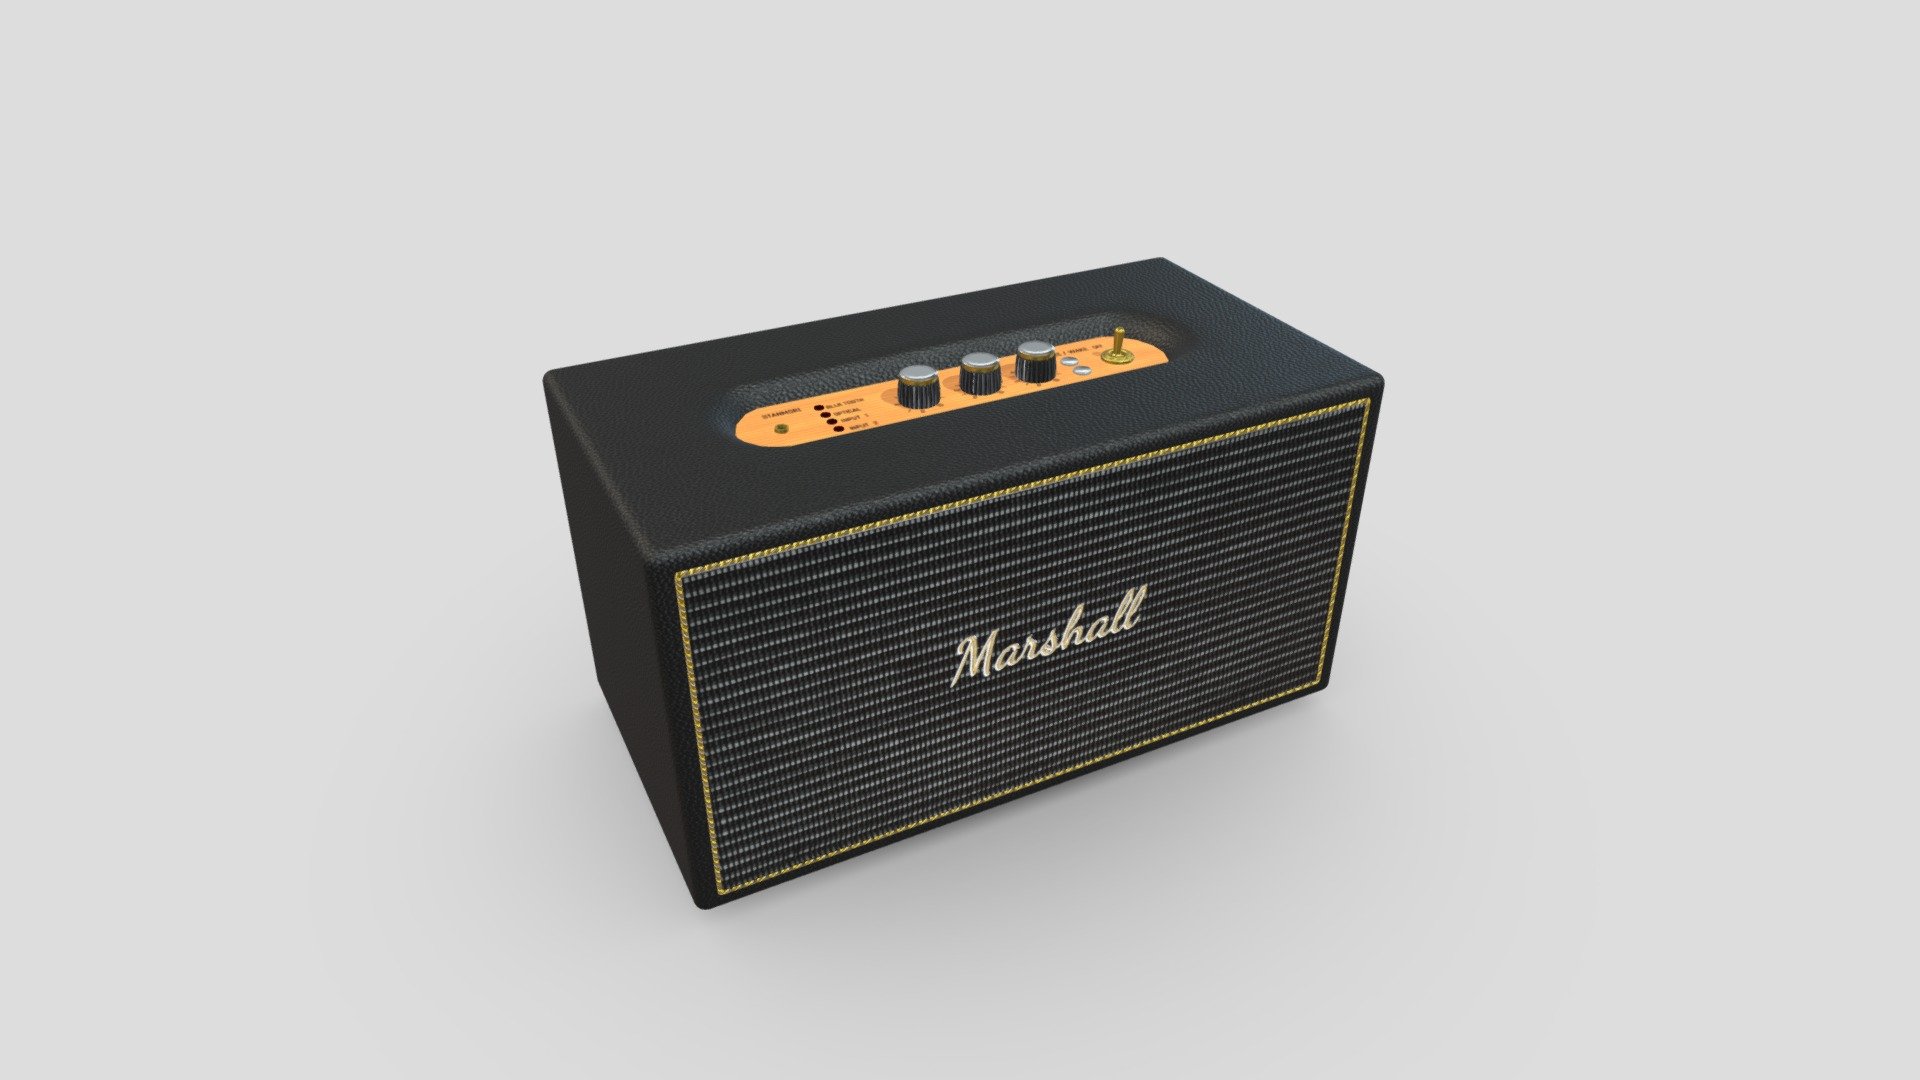 Check out this high quality low-poly 3D model of Marshall Stanmore Speaker.

For your 3D modelling requirements or if you wish to purchase this model, connect with us at info@shinobu3d.com.

We offer premium quality low poly 3D assets/models for AR/VR applications, 3D visualisations, 3D product configurators, 3D printing &amp; 3D animations.

Visit https://www.shinobu3d.com for more on us 3d model